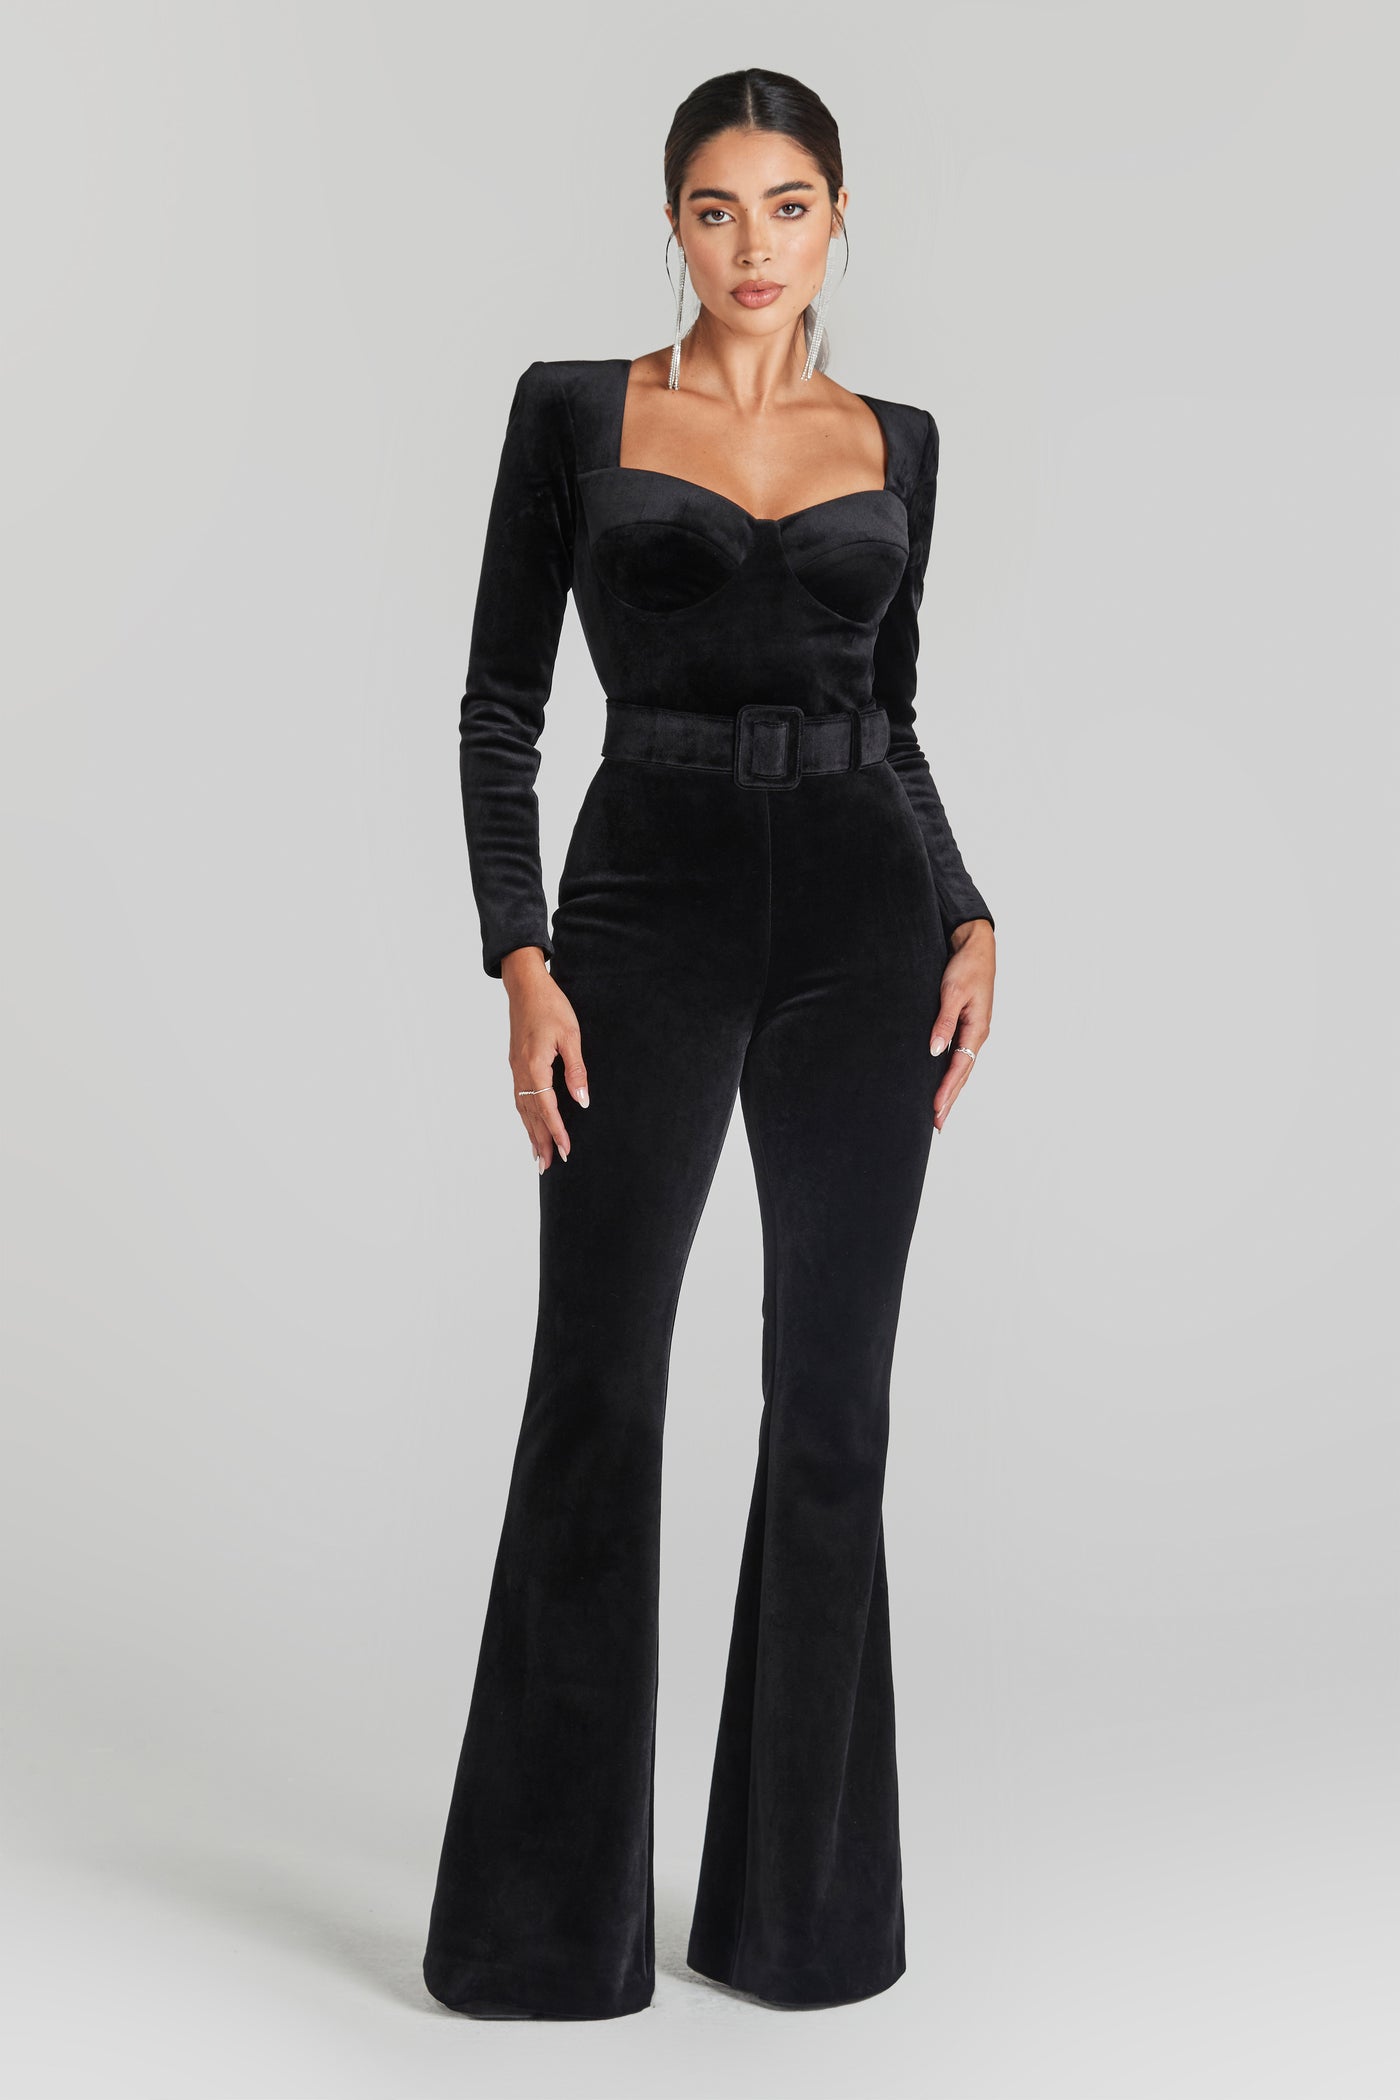 25 Jumpsuits for Women to Shop in 2022